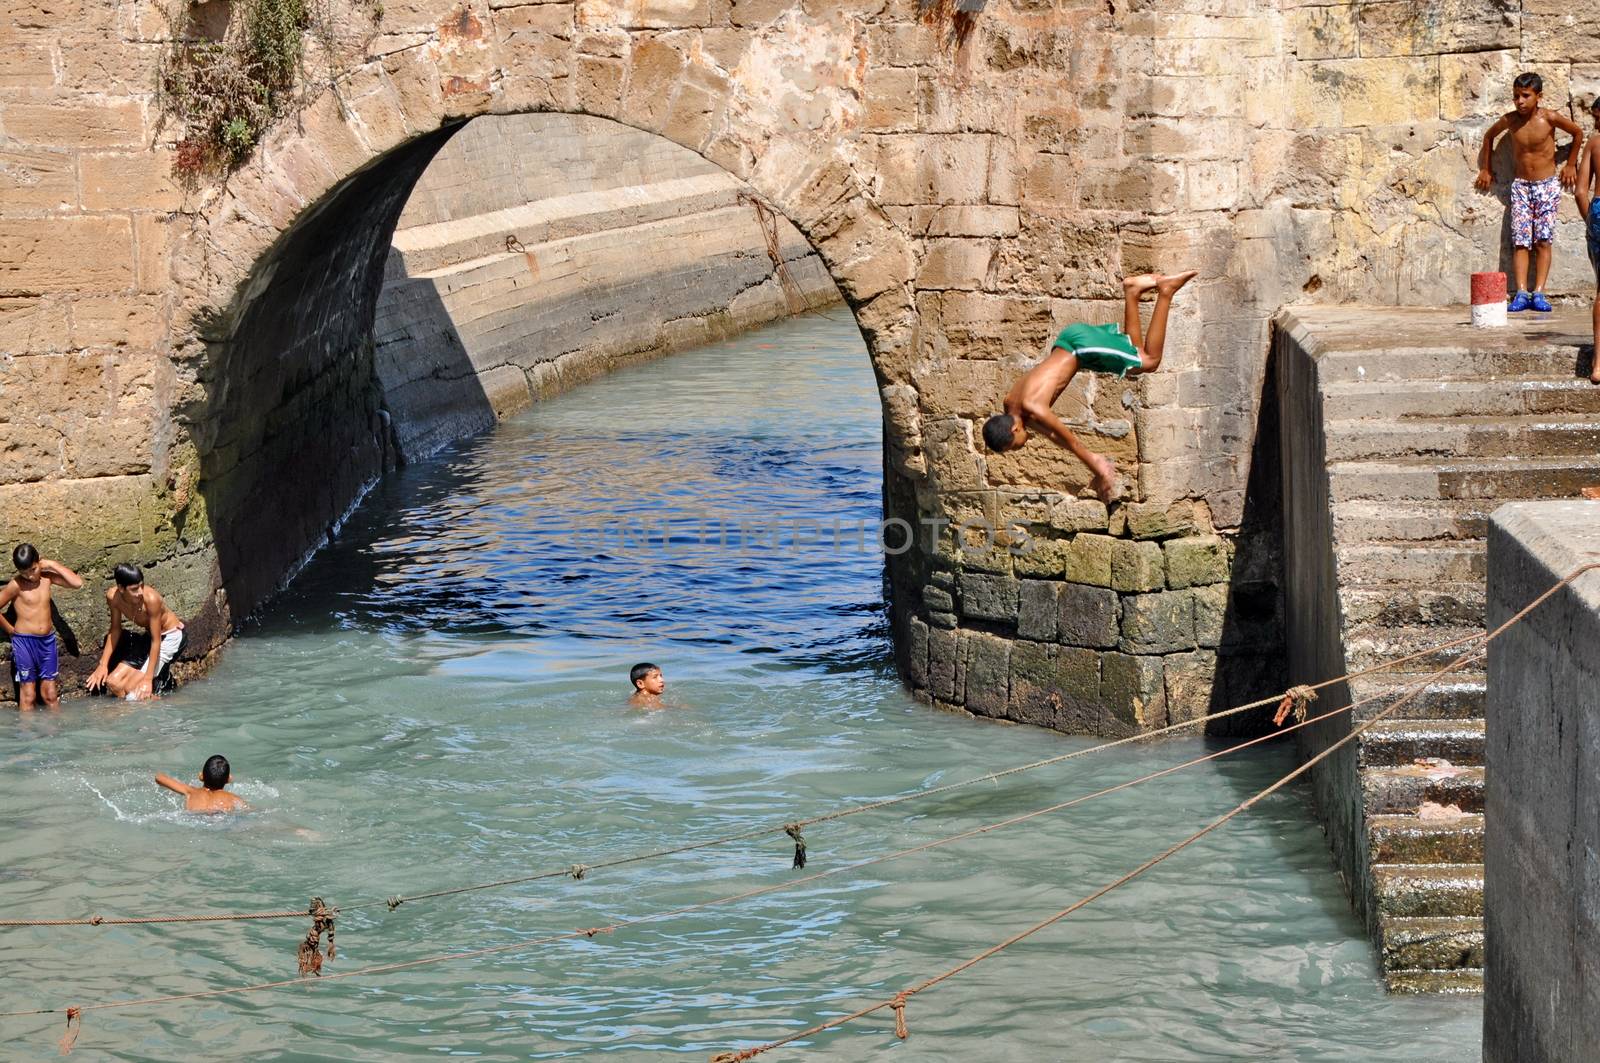 ESSAOUIRA - SEPTEMBER 29: Children take a bath in the canal. Ess by anderm